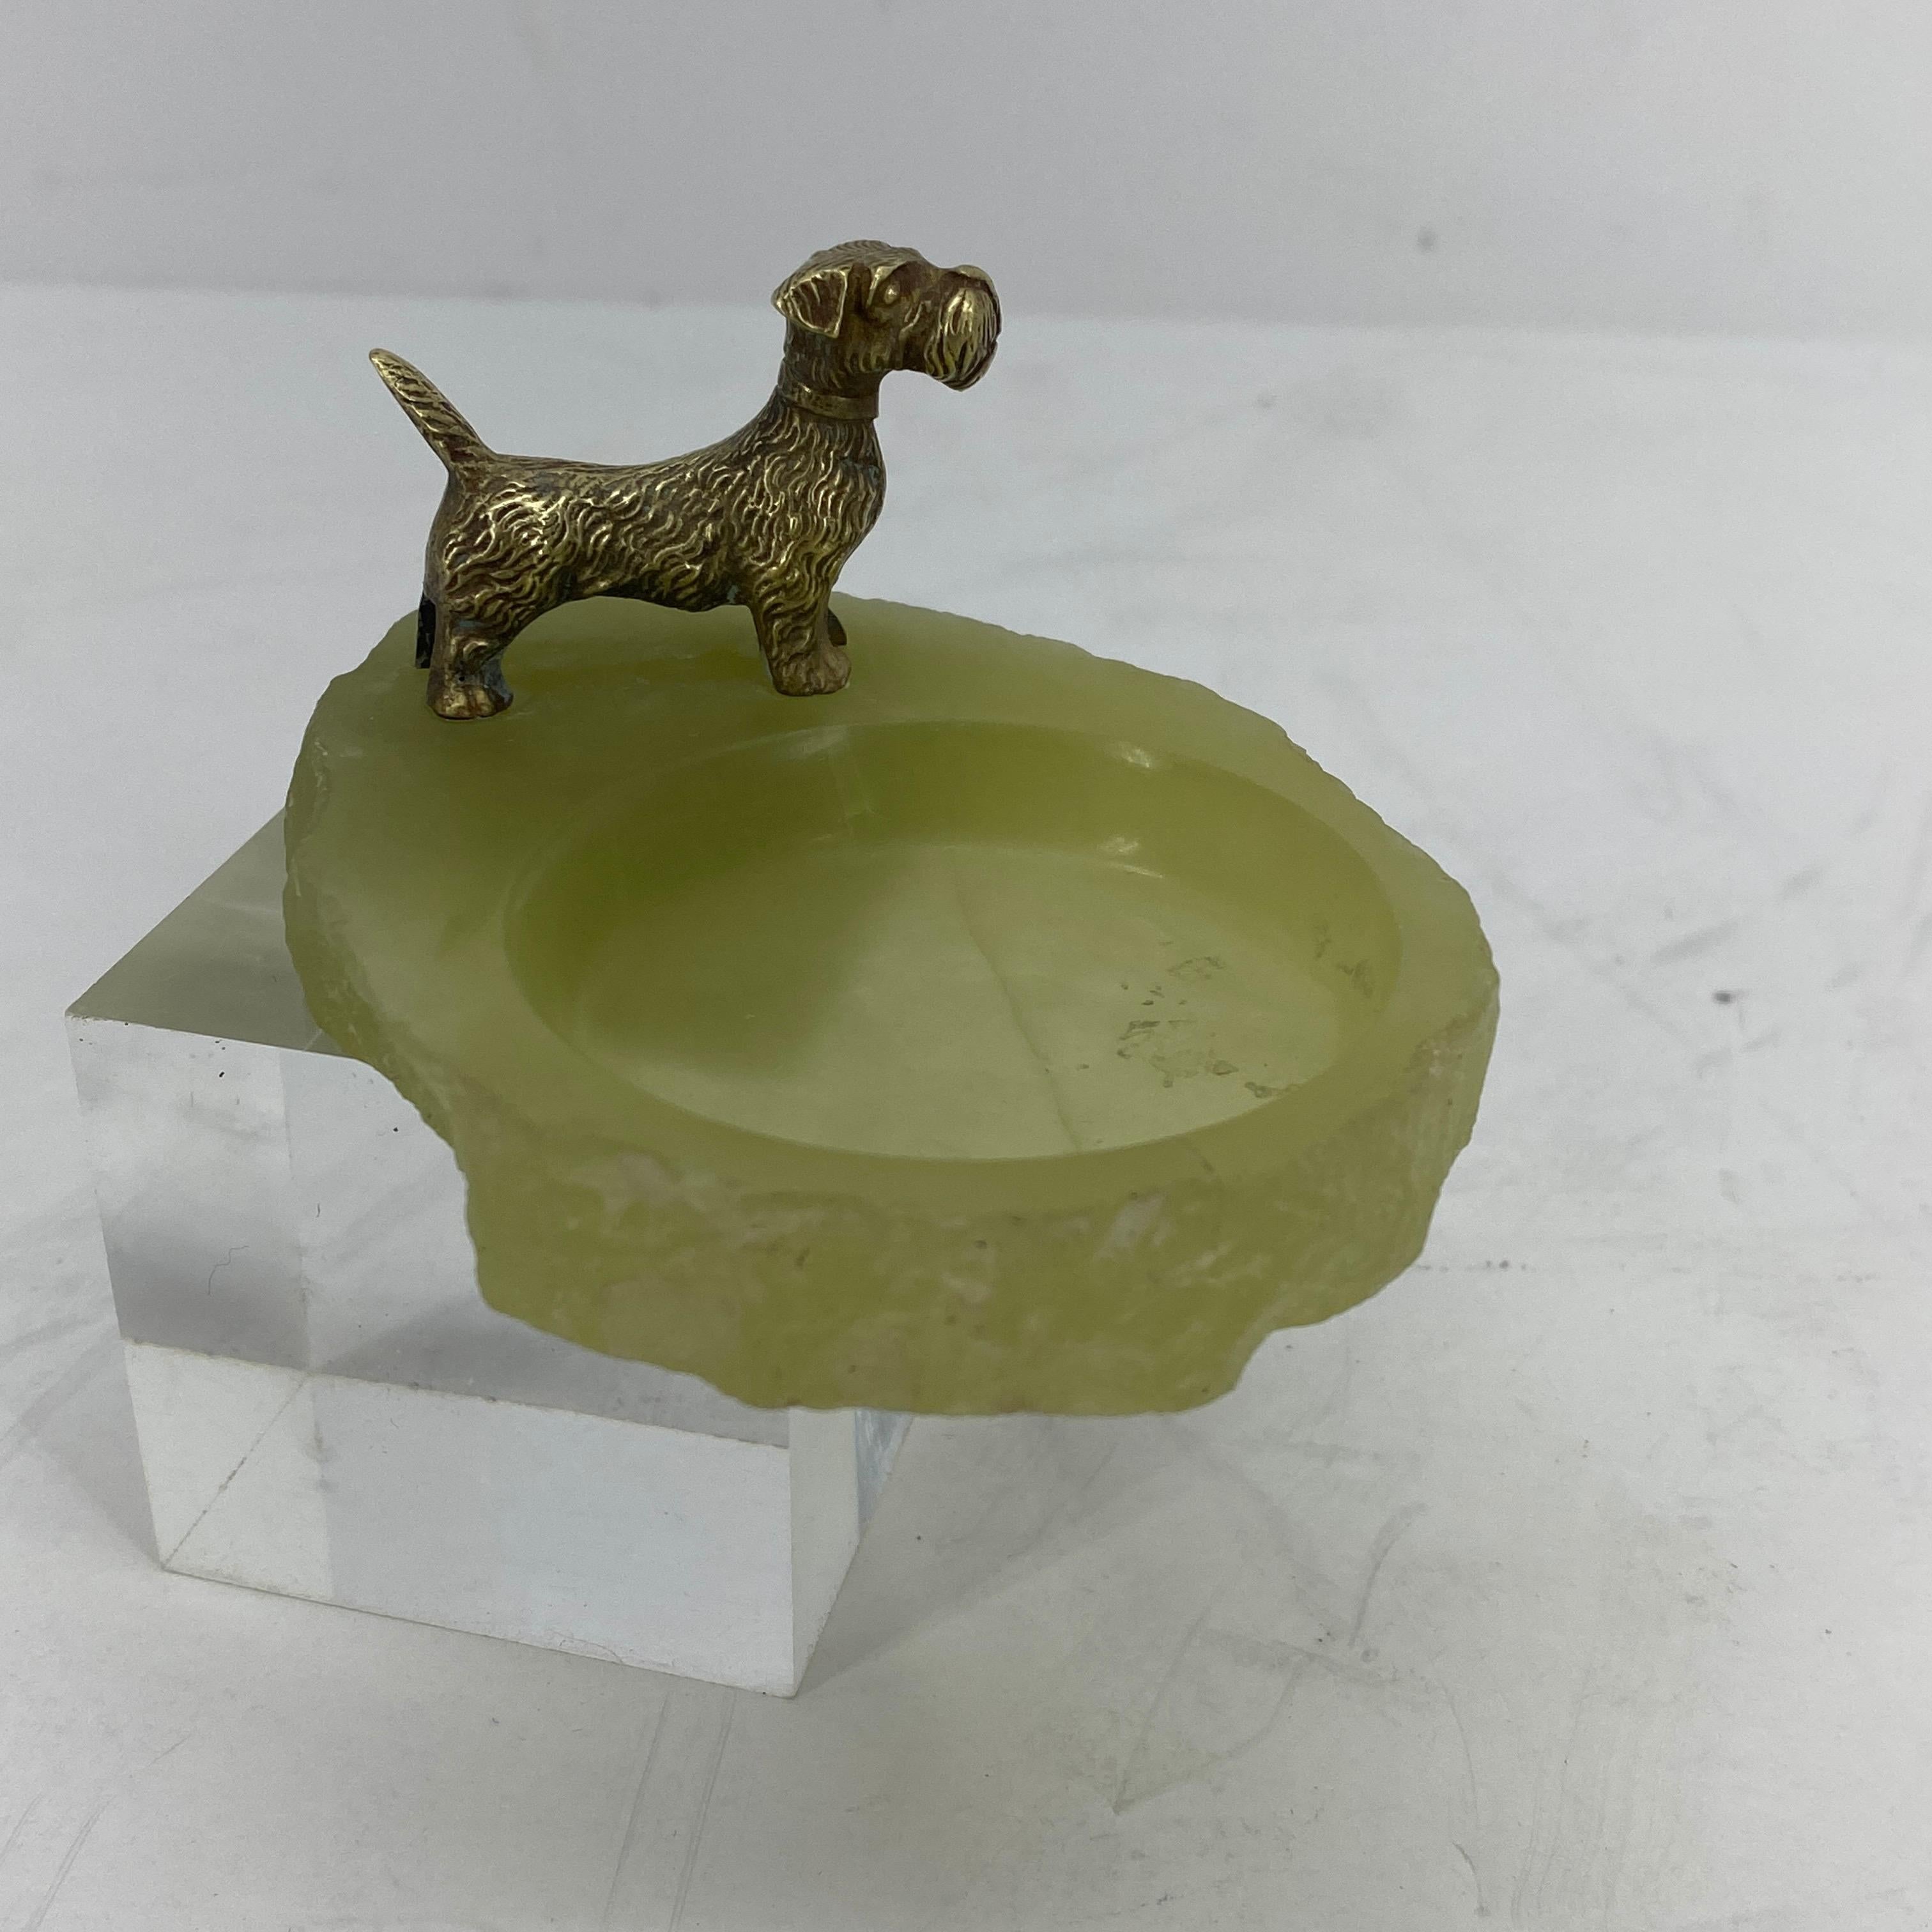 Pistachio Green Onyx and Bronze Terrier Ashtray or Jewelry Tray 7